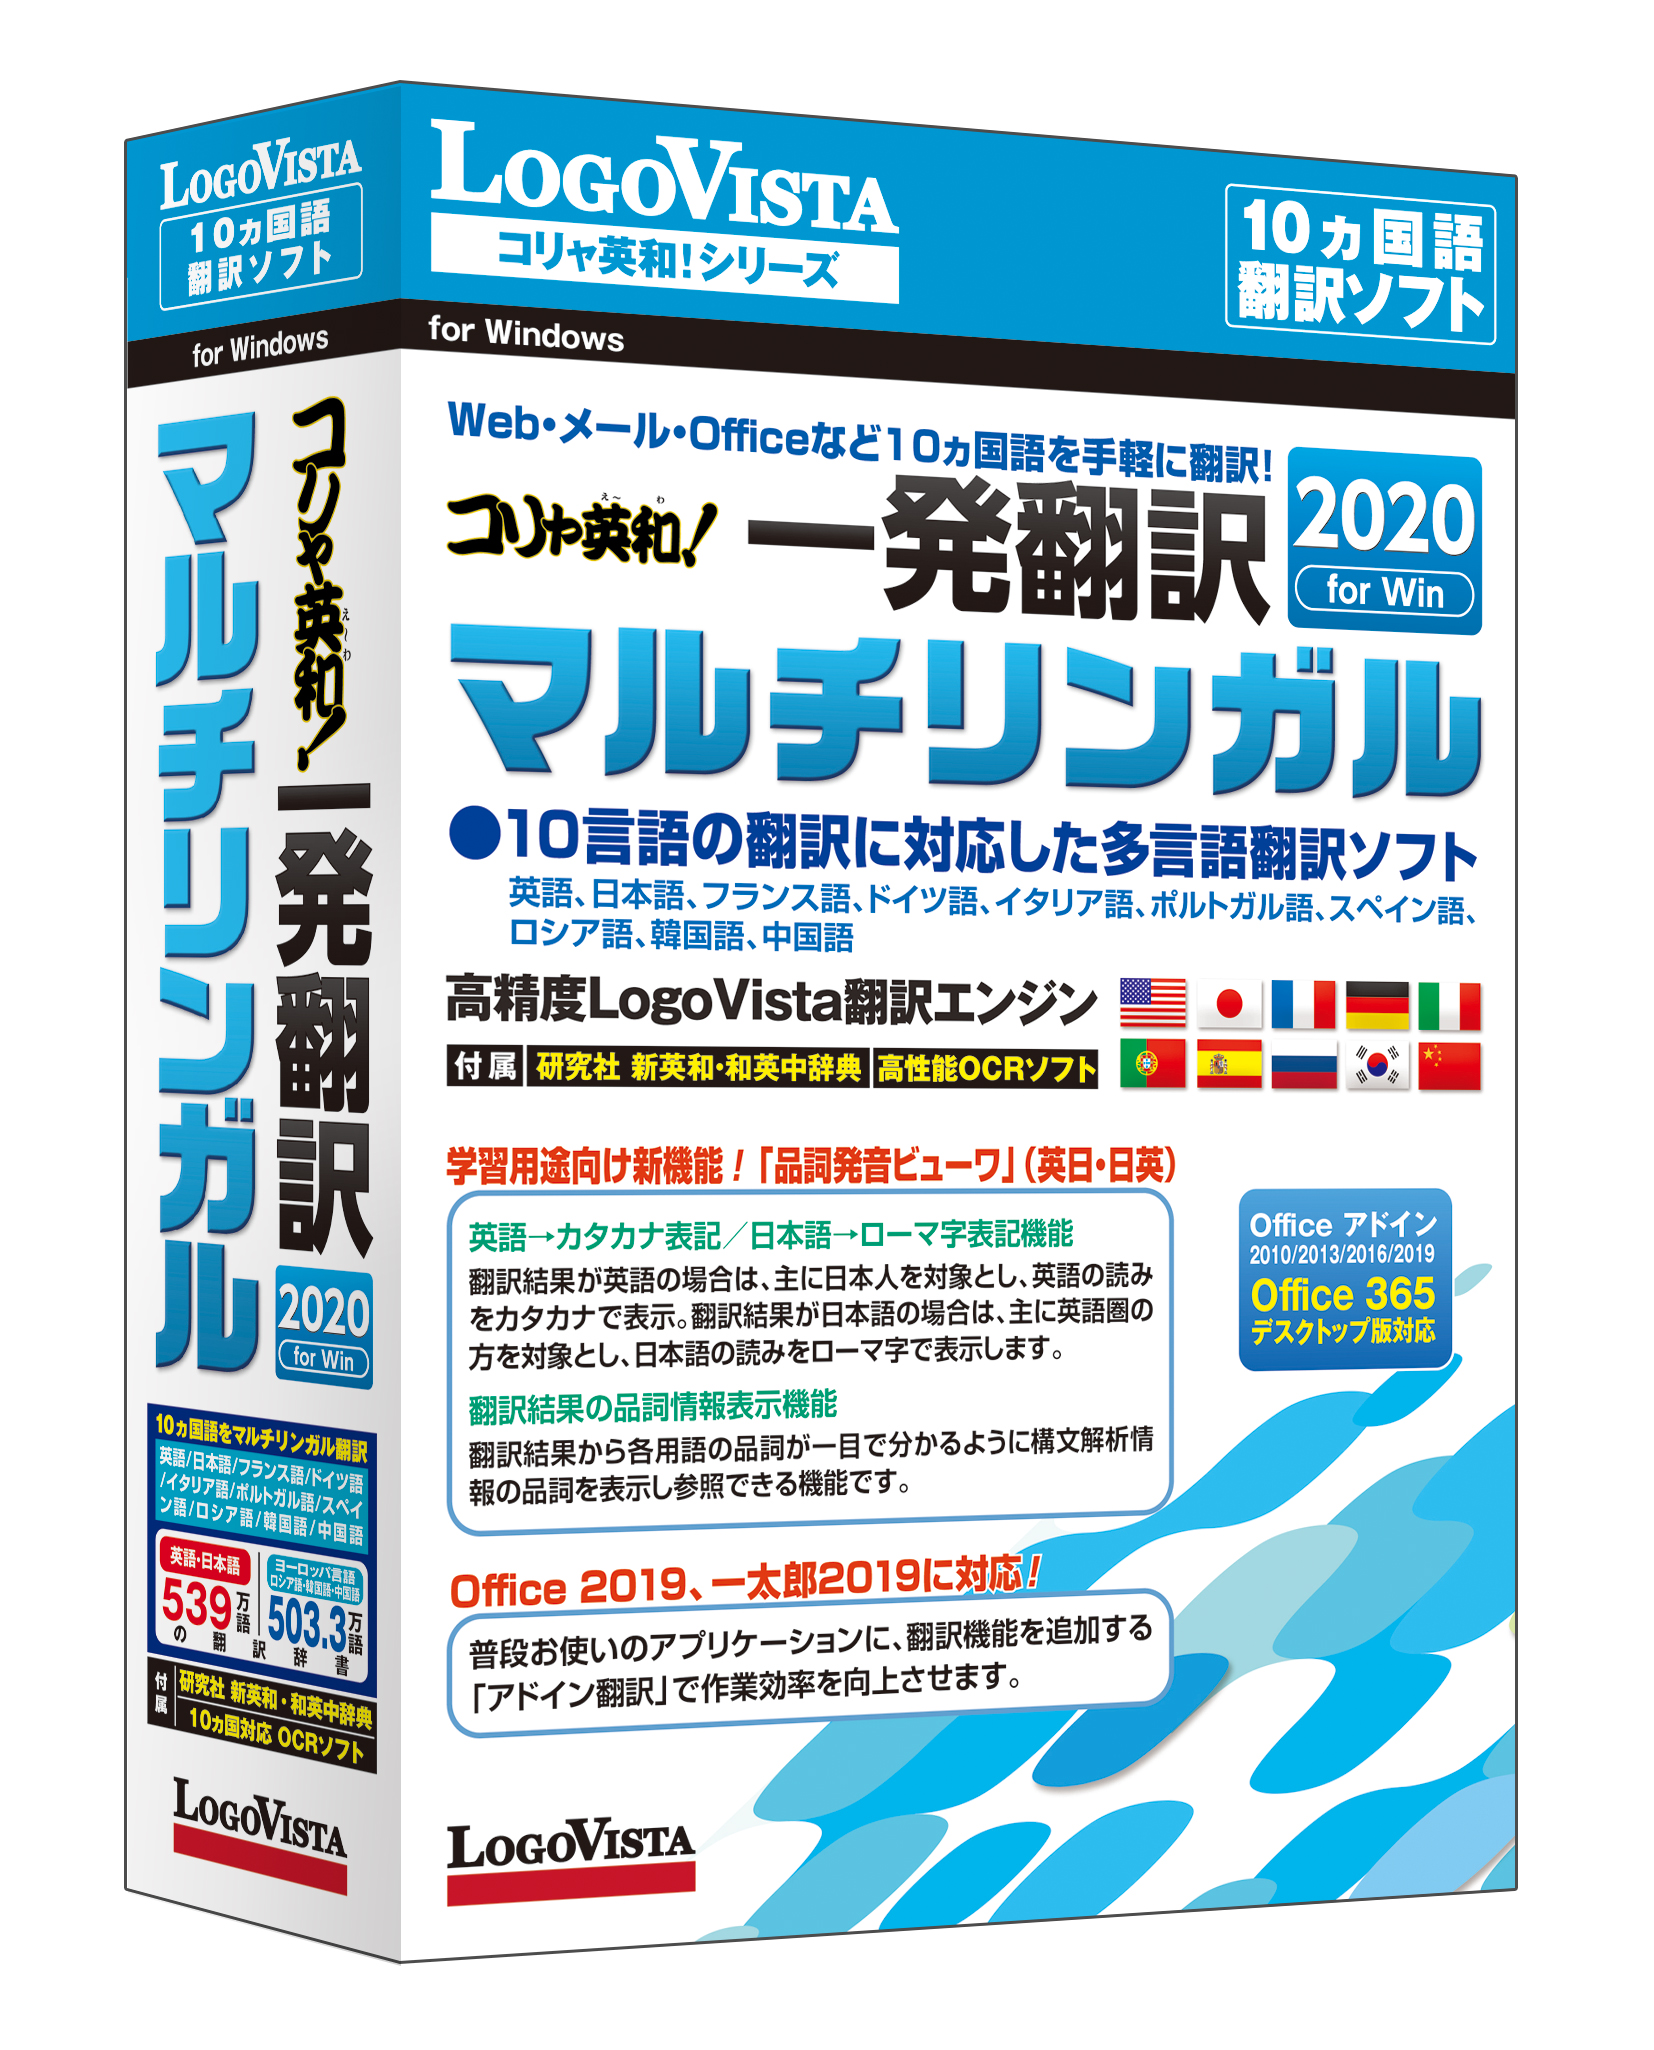 Product Category コリャ英和一発翻訳 2021 for Win マルチリンガル